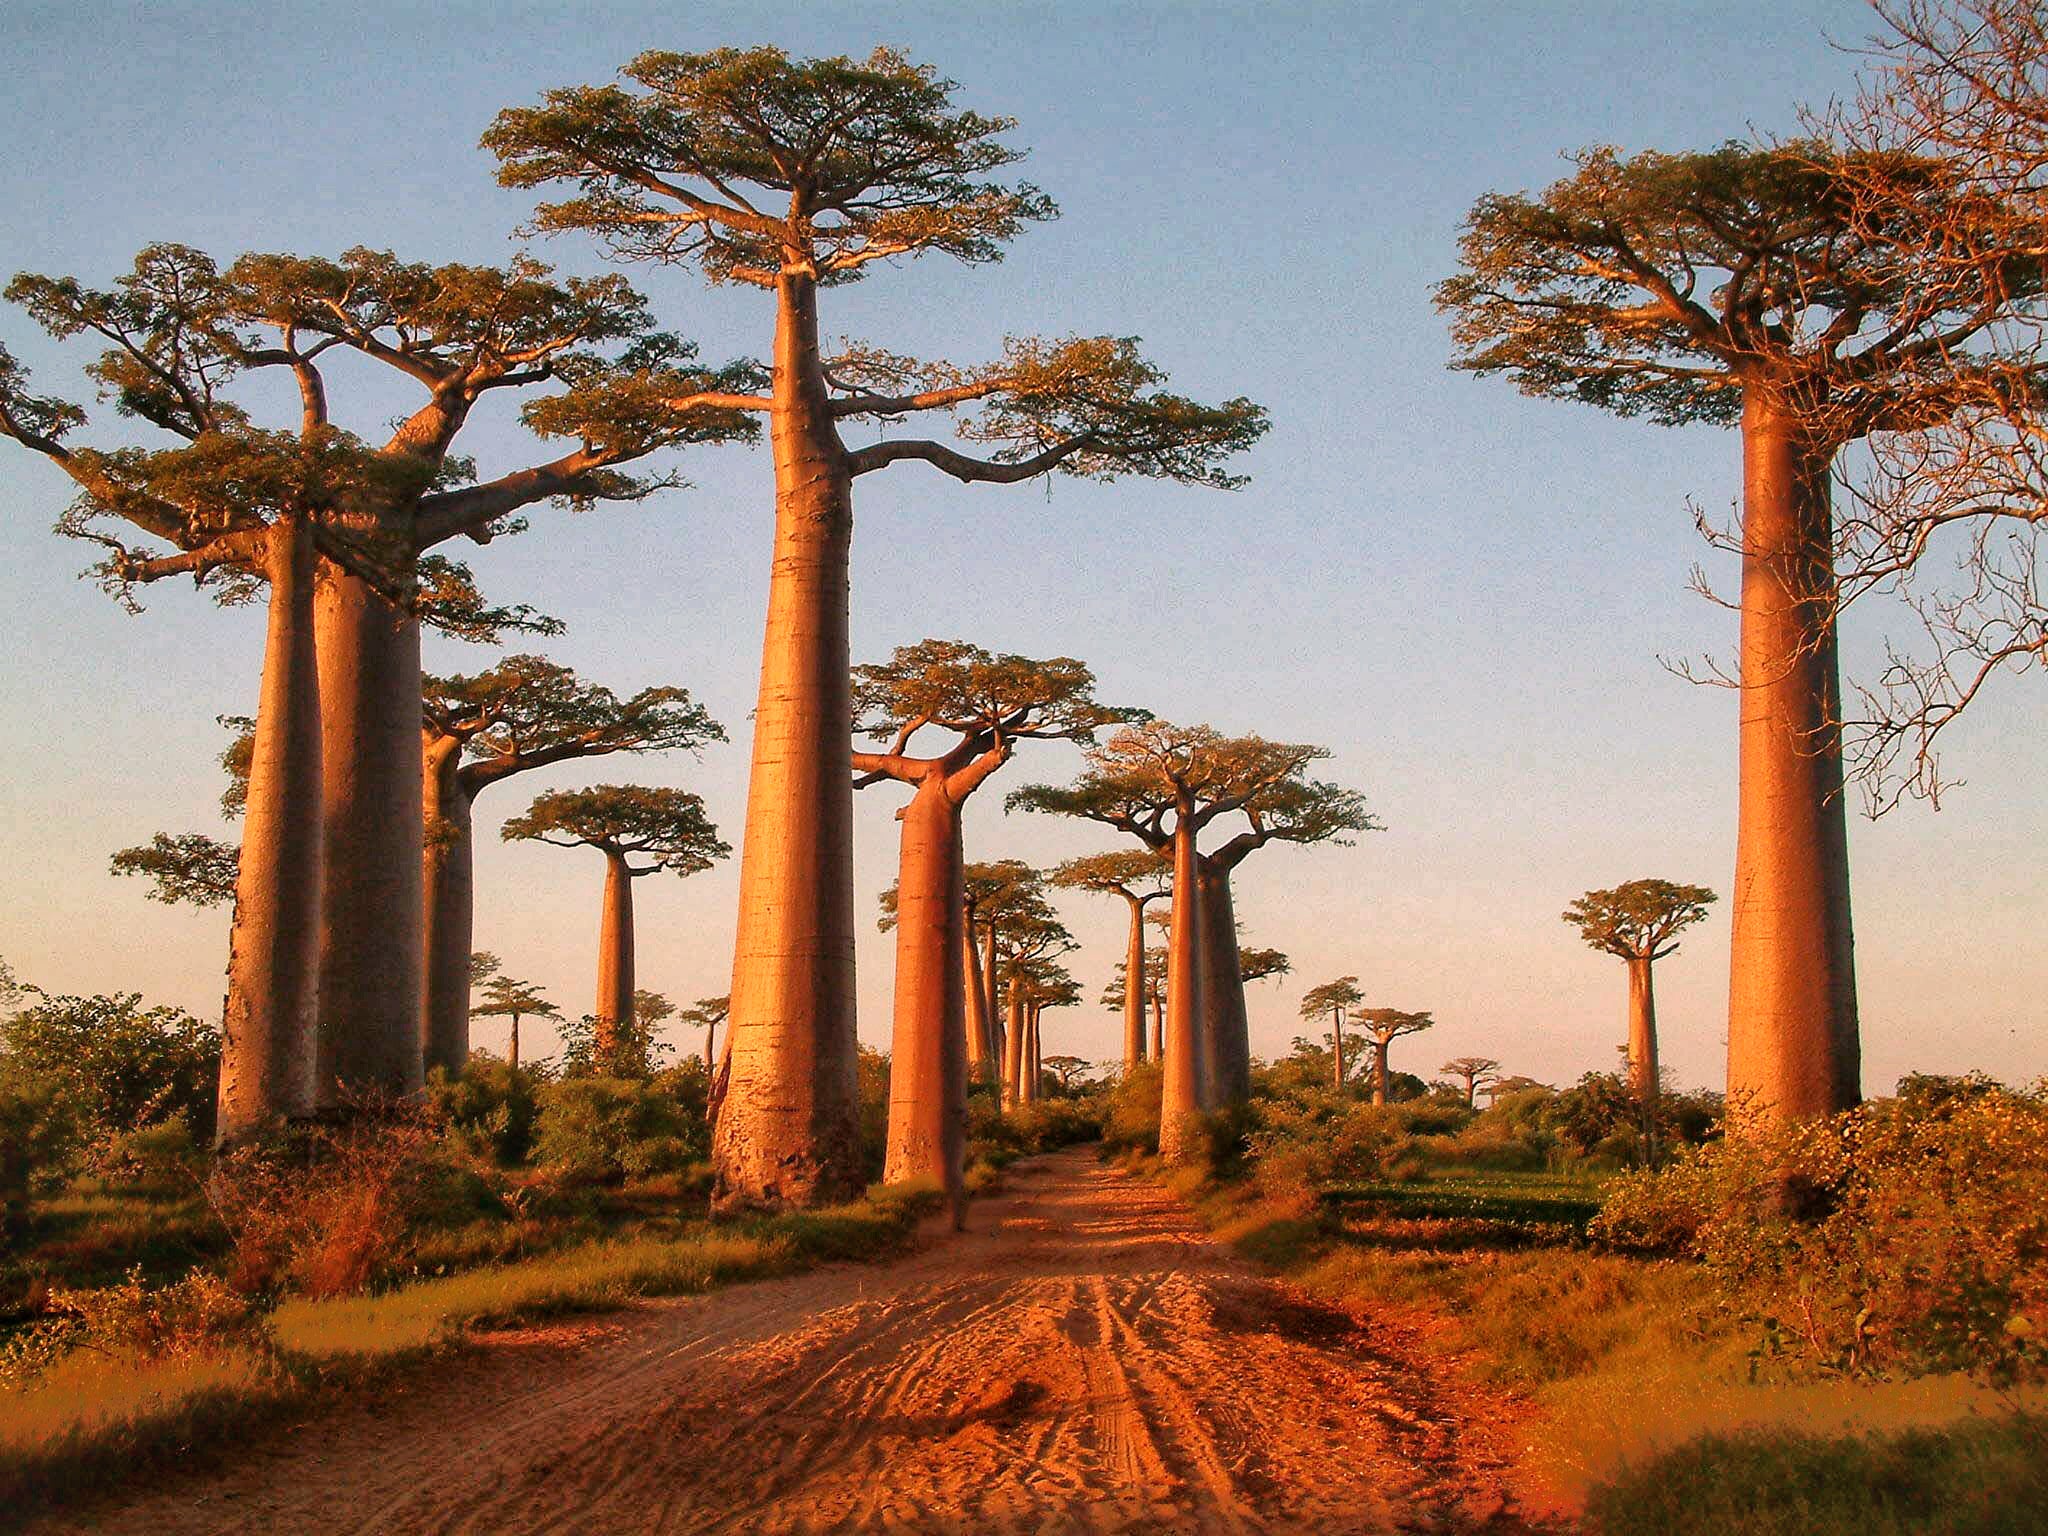 Morondava’s famous avenue of baobab trees captured at sunset